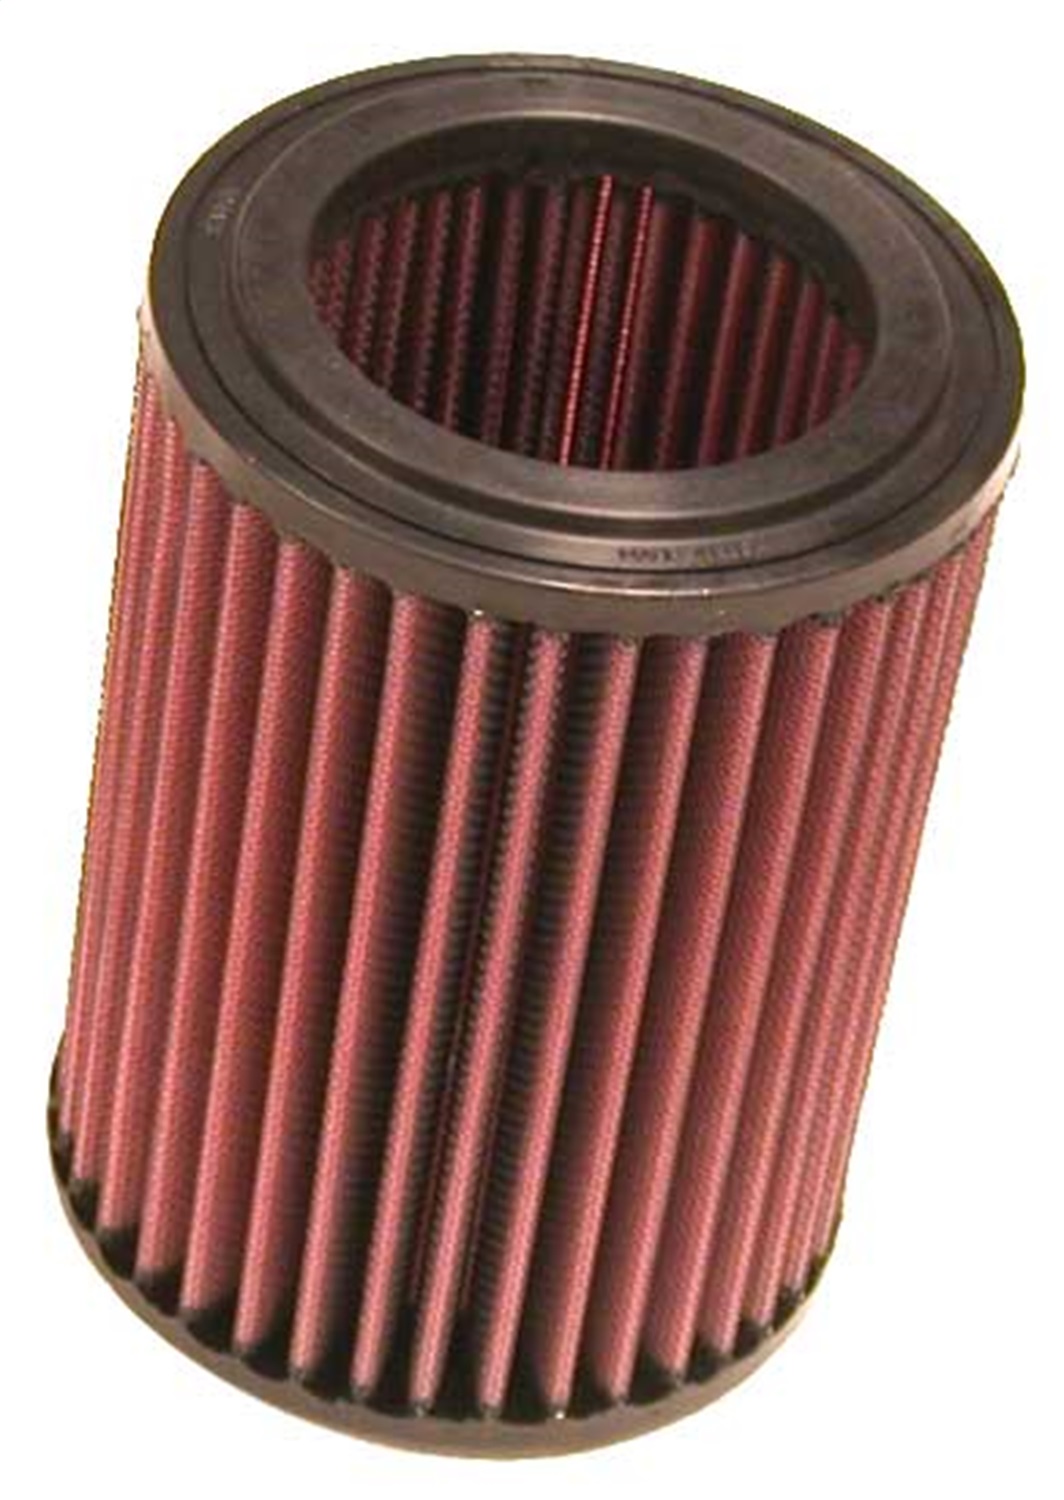 K&N Filters K&N Filters E-0771 Air Filter Fits 03-06 Element